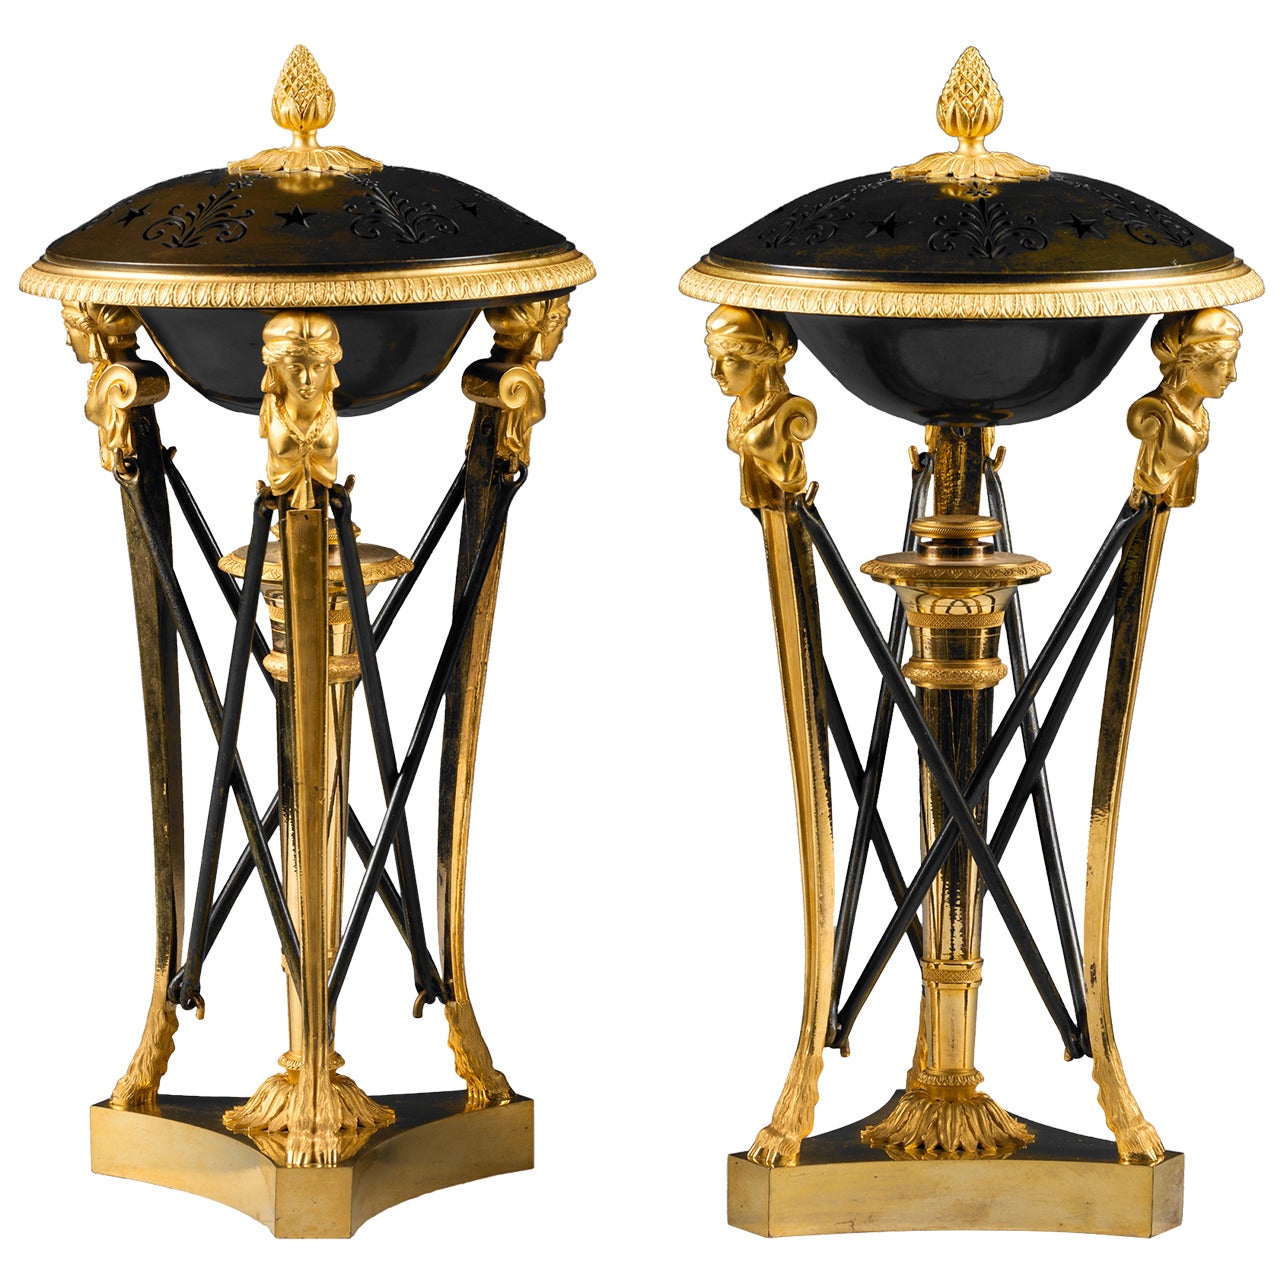 Pair of “Athénienne” Empire Incense Burners, Attributed to Claude Galle